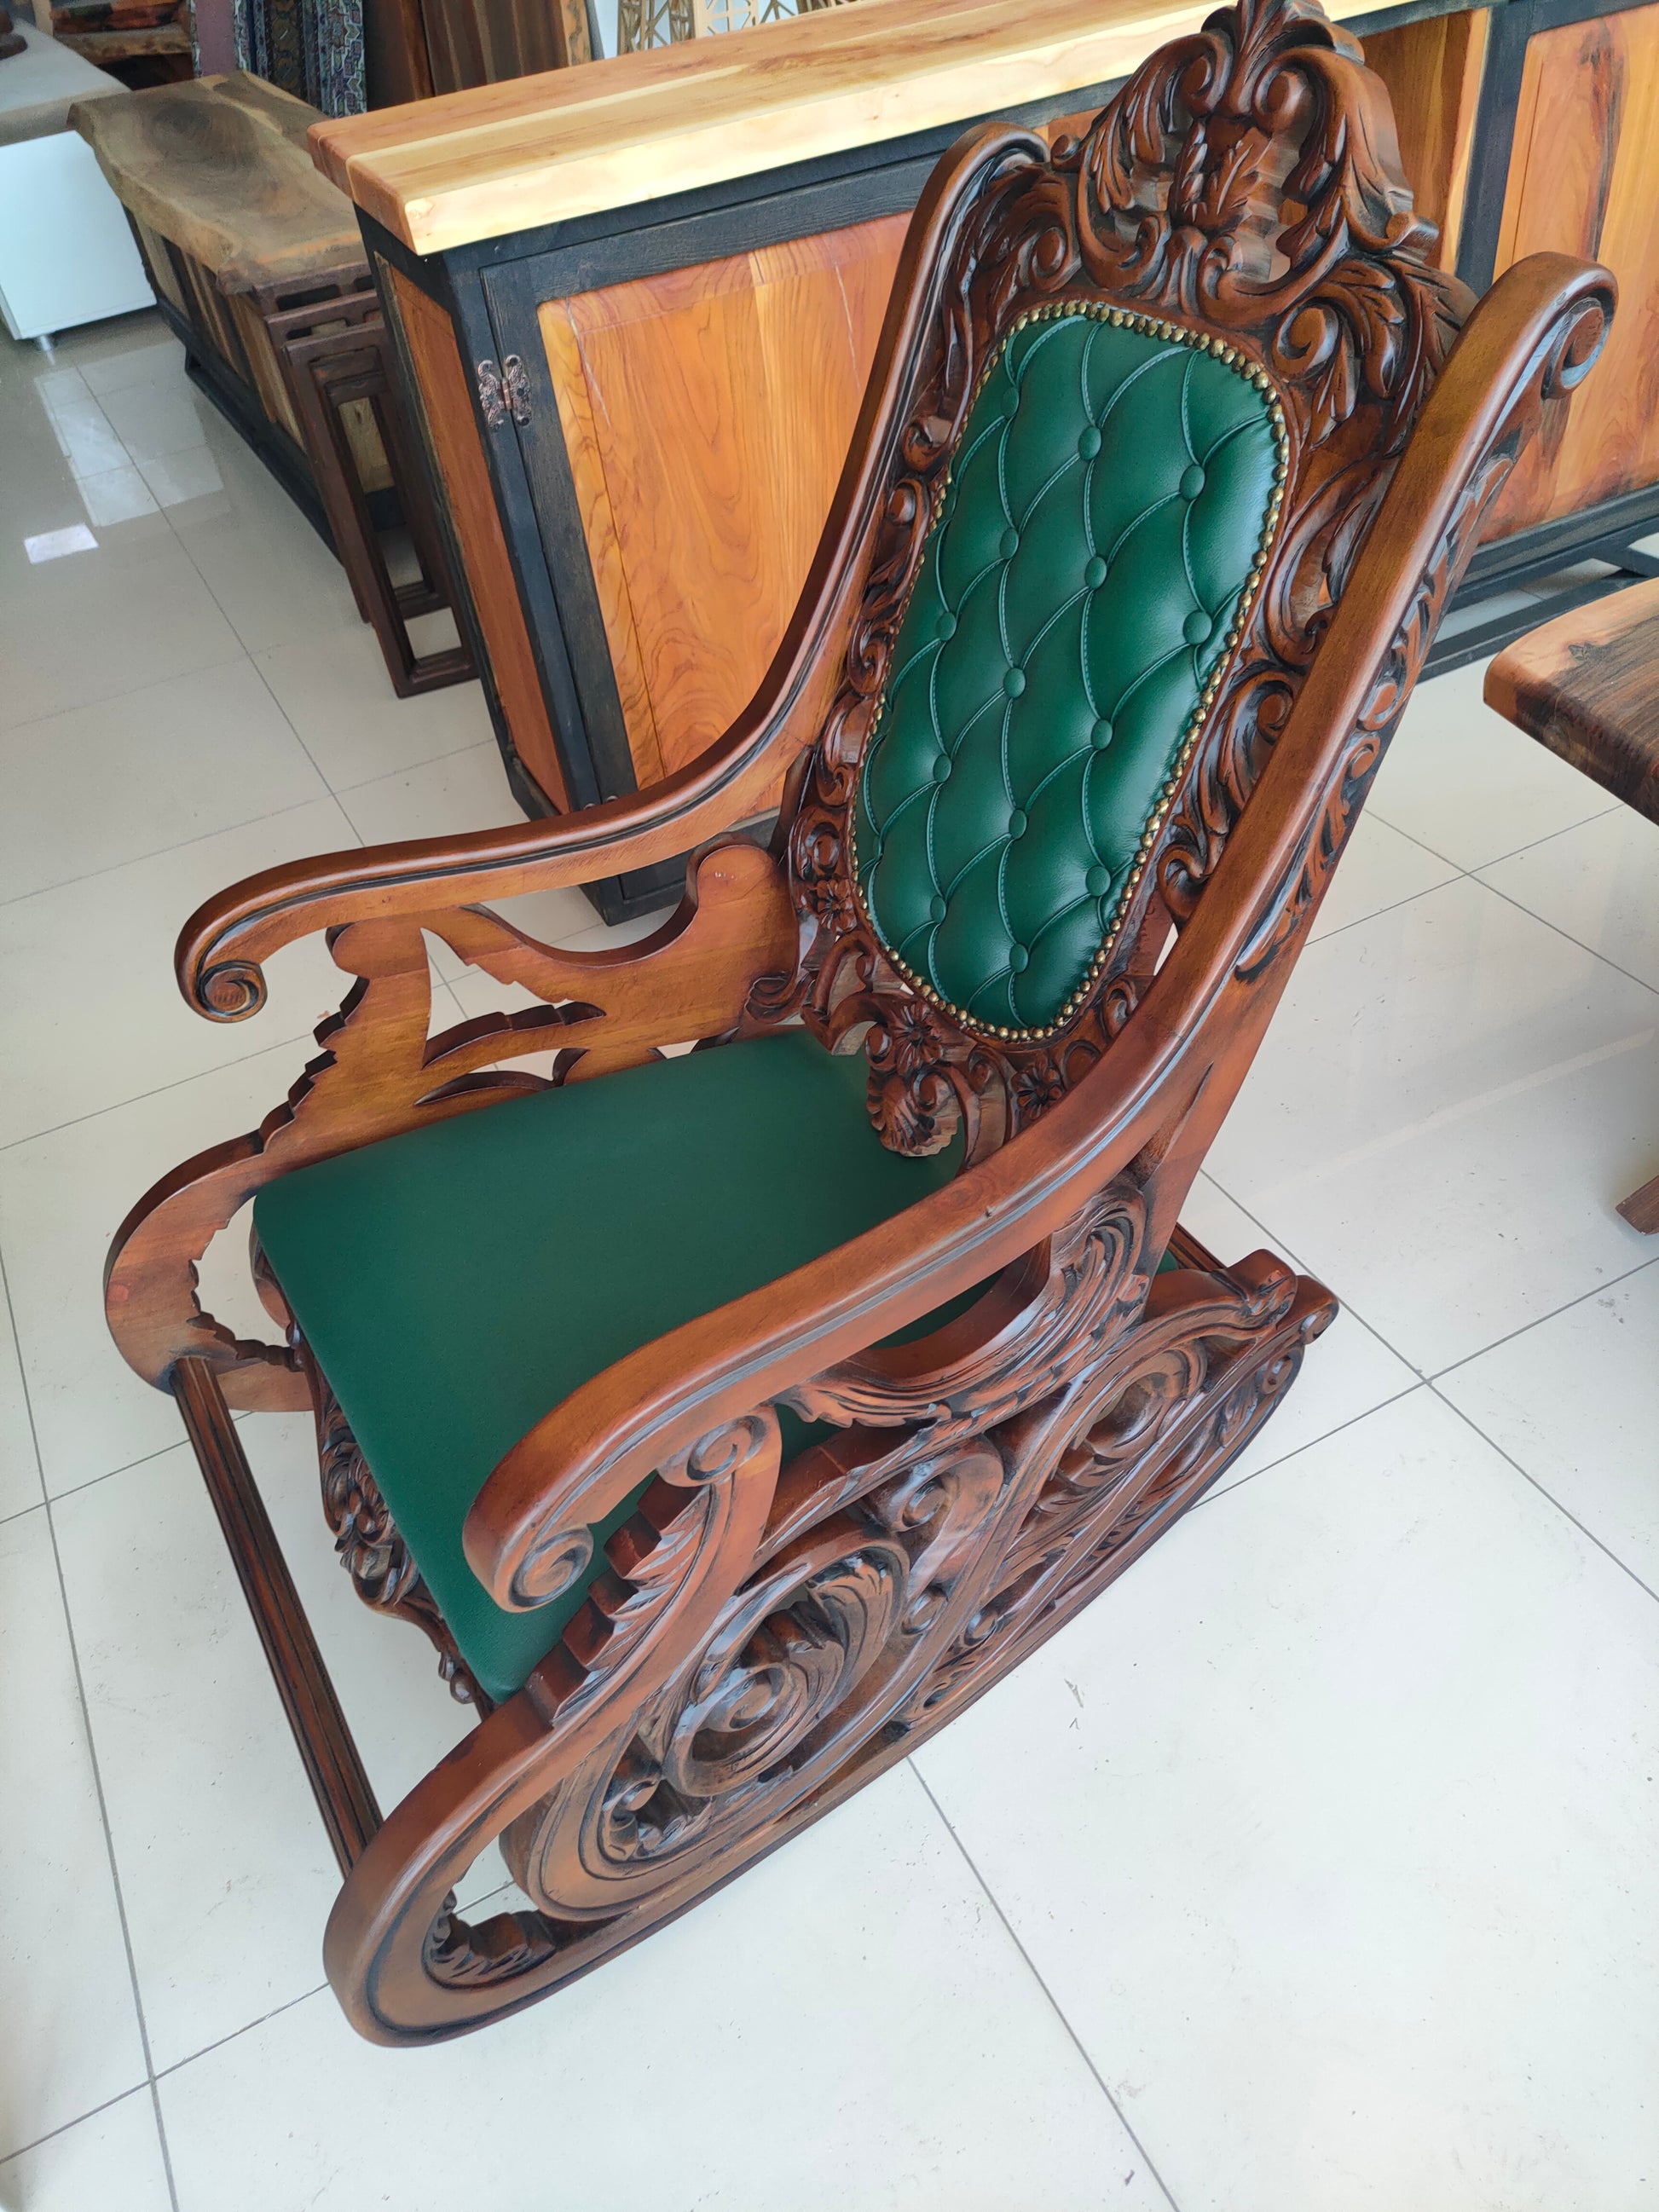 Side view of rococo-style rocking chair